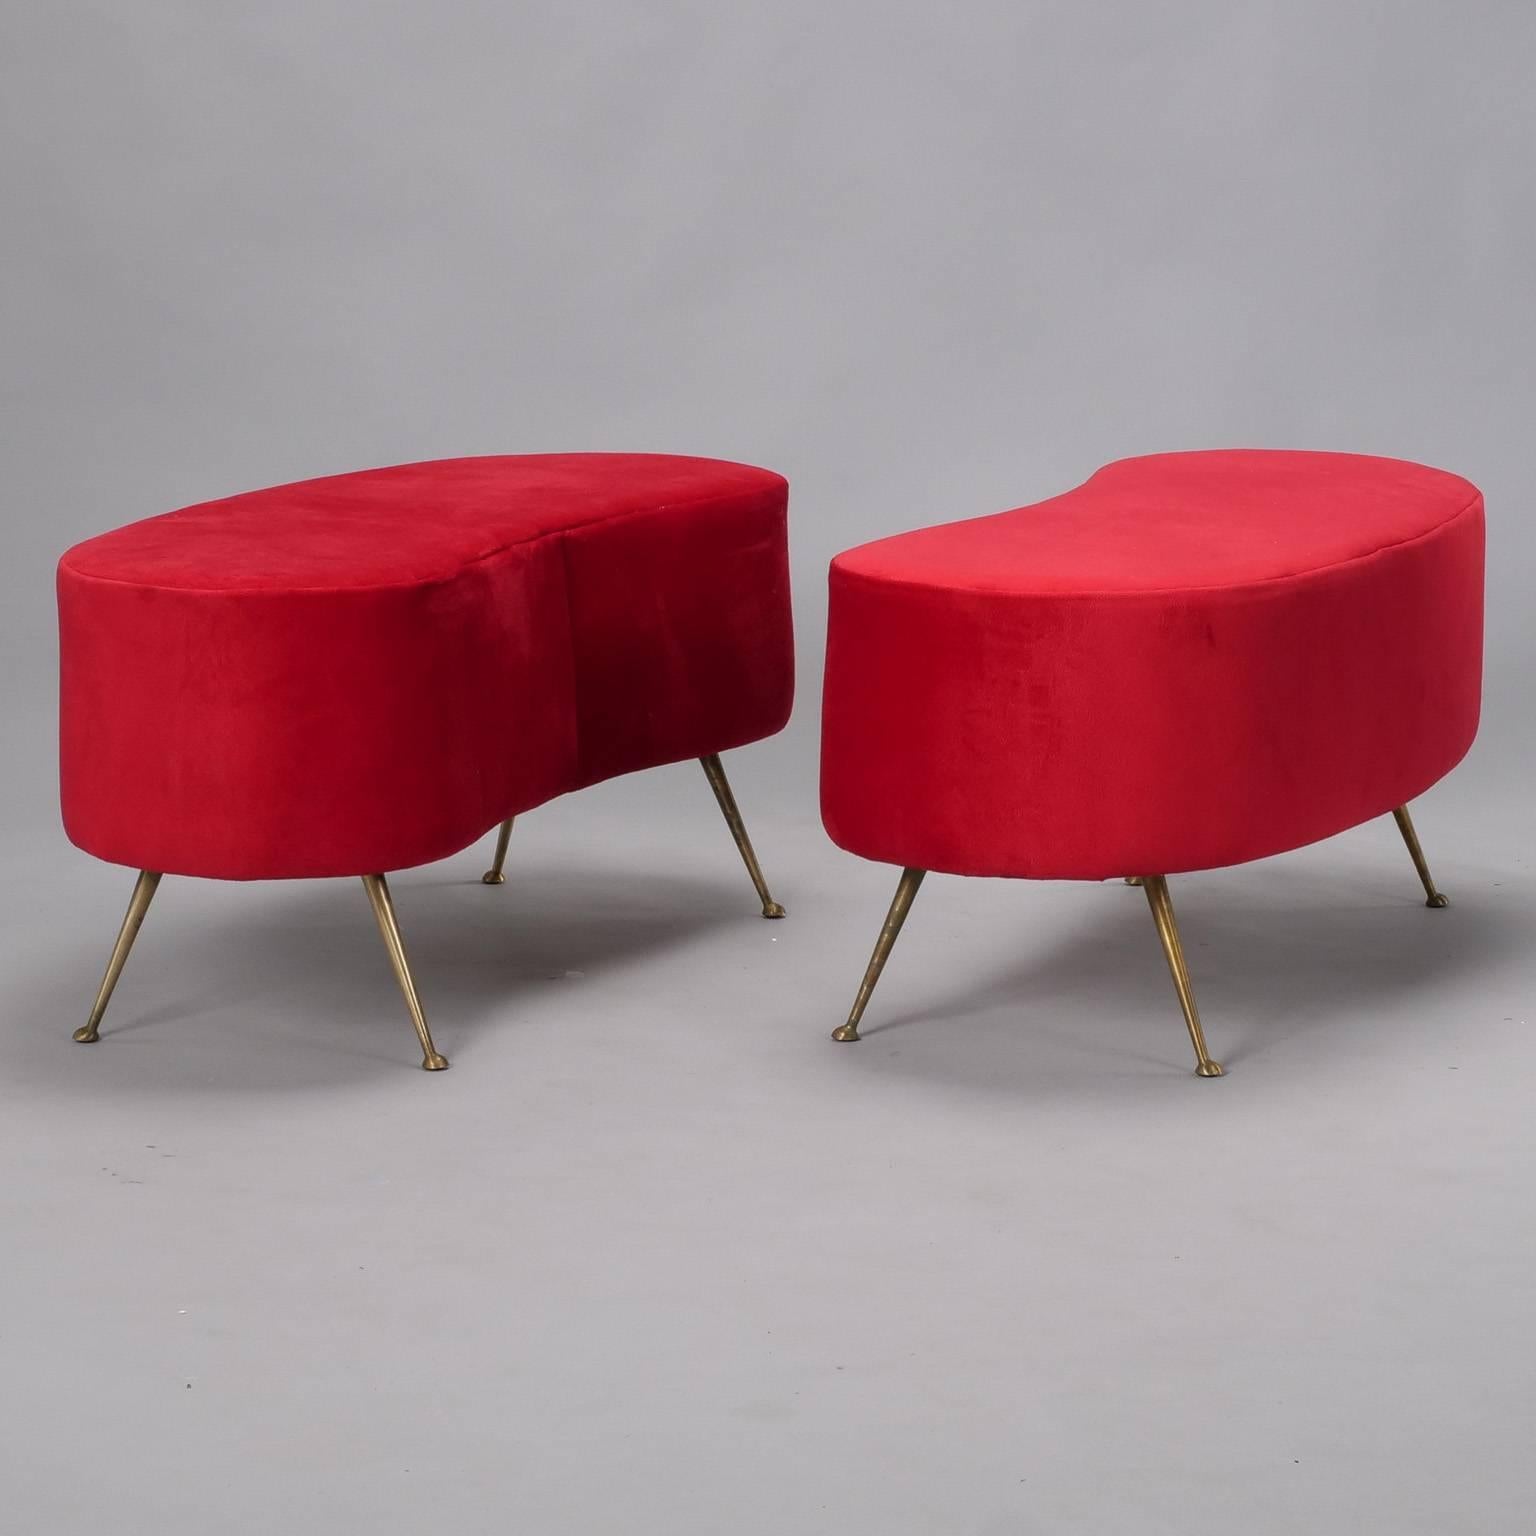 Italian made upholstered bench in manner of Gio Ponti has a kidney shaped body and narrow, tapered brass legs, circa early 1960s. Covered in a true red fabric that has a suede-like appearance and feel. 
     